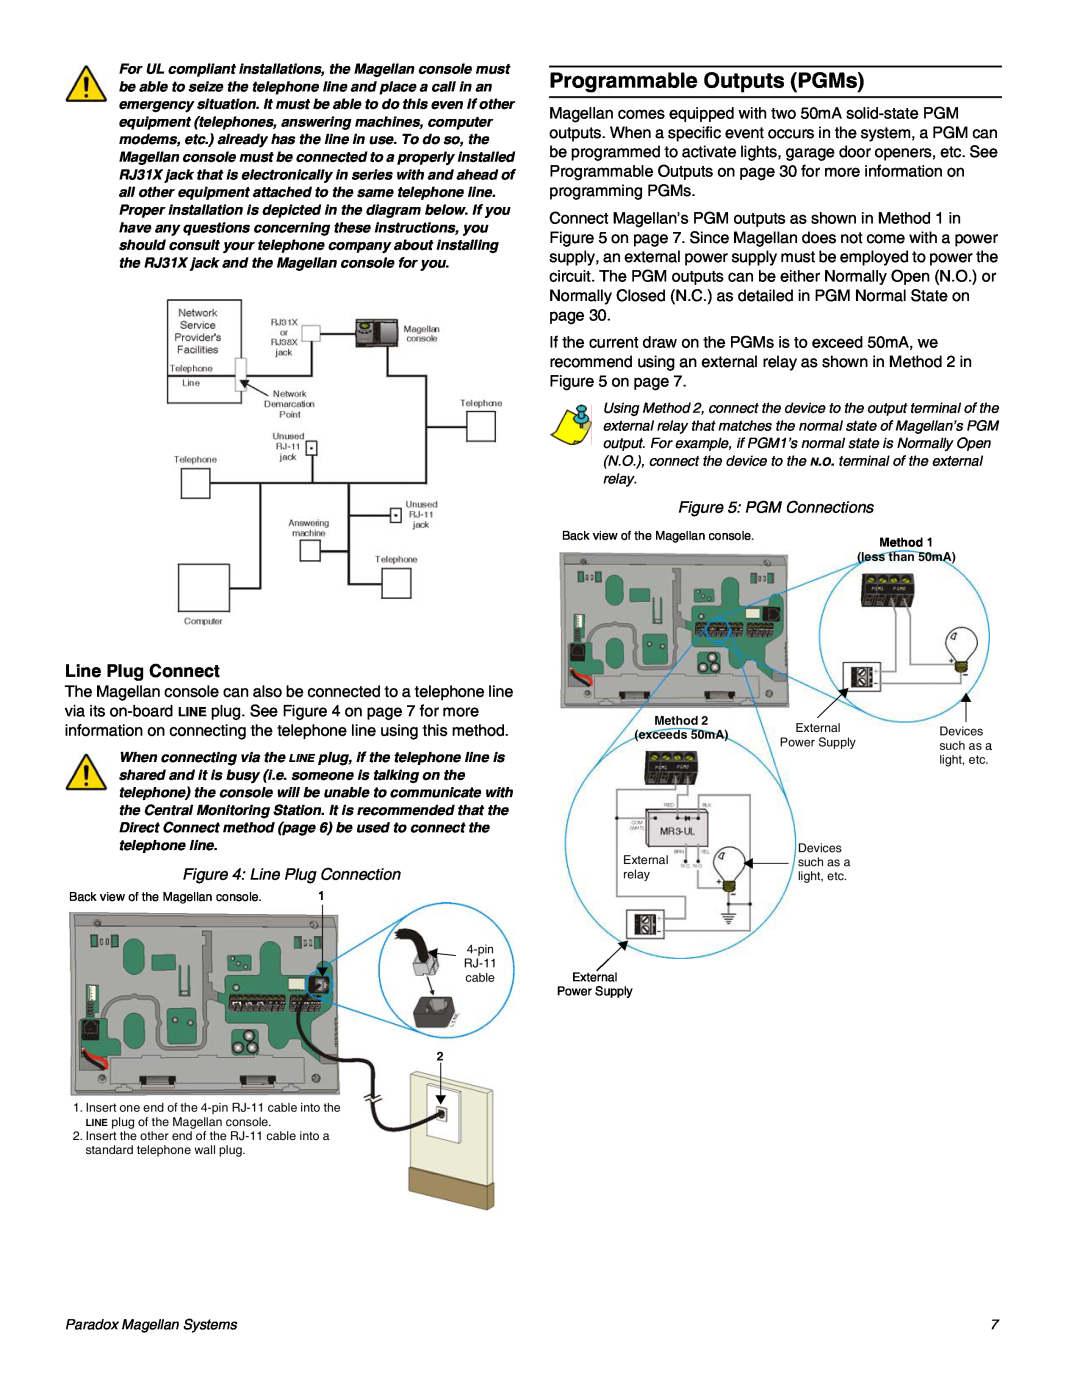 Magellan MG-6060 installation manual Programmable Outputs PGMs, PGM Connections, Line Plug Connection 